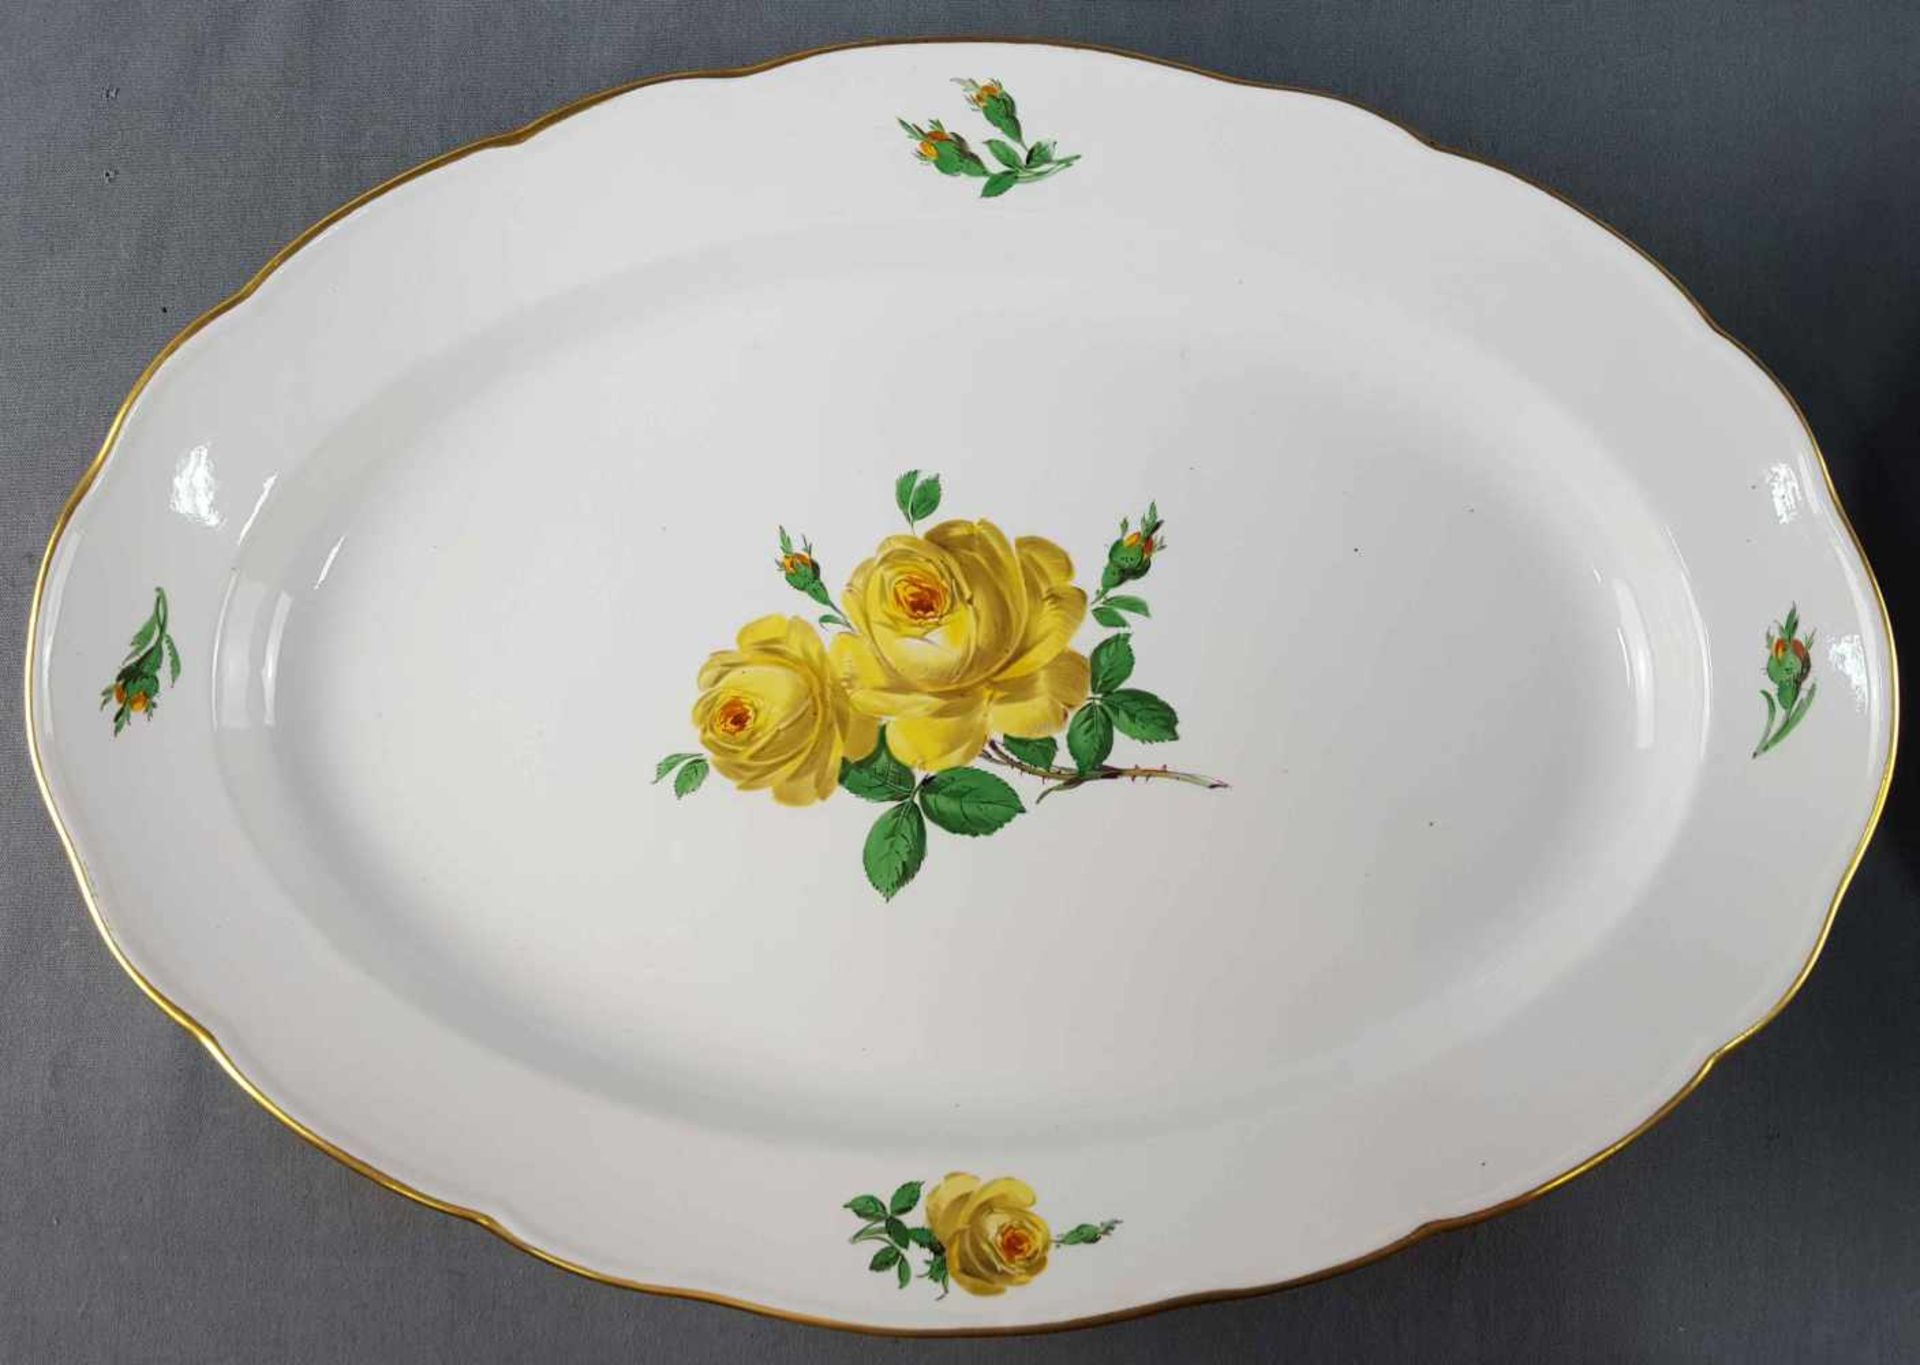 Dining service Meissen porcelain, yellow rose with gold rim. - Image 11 of 18